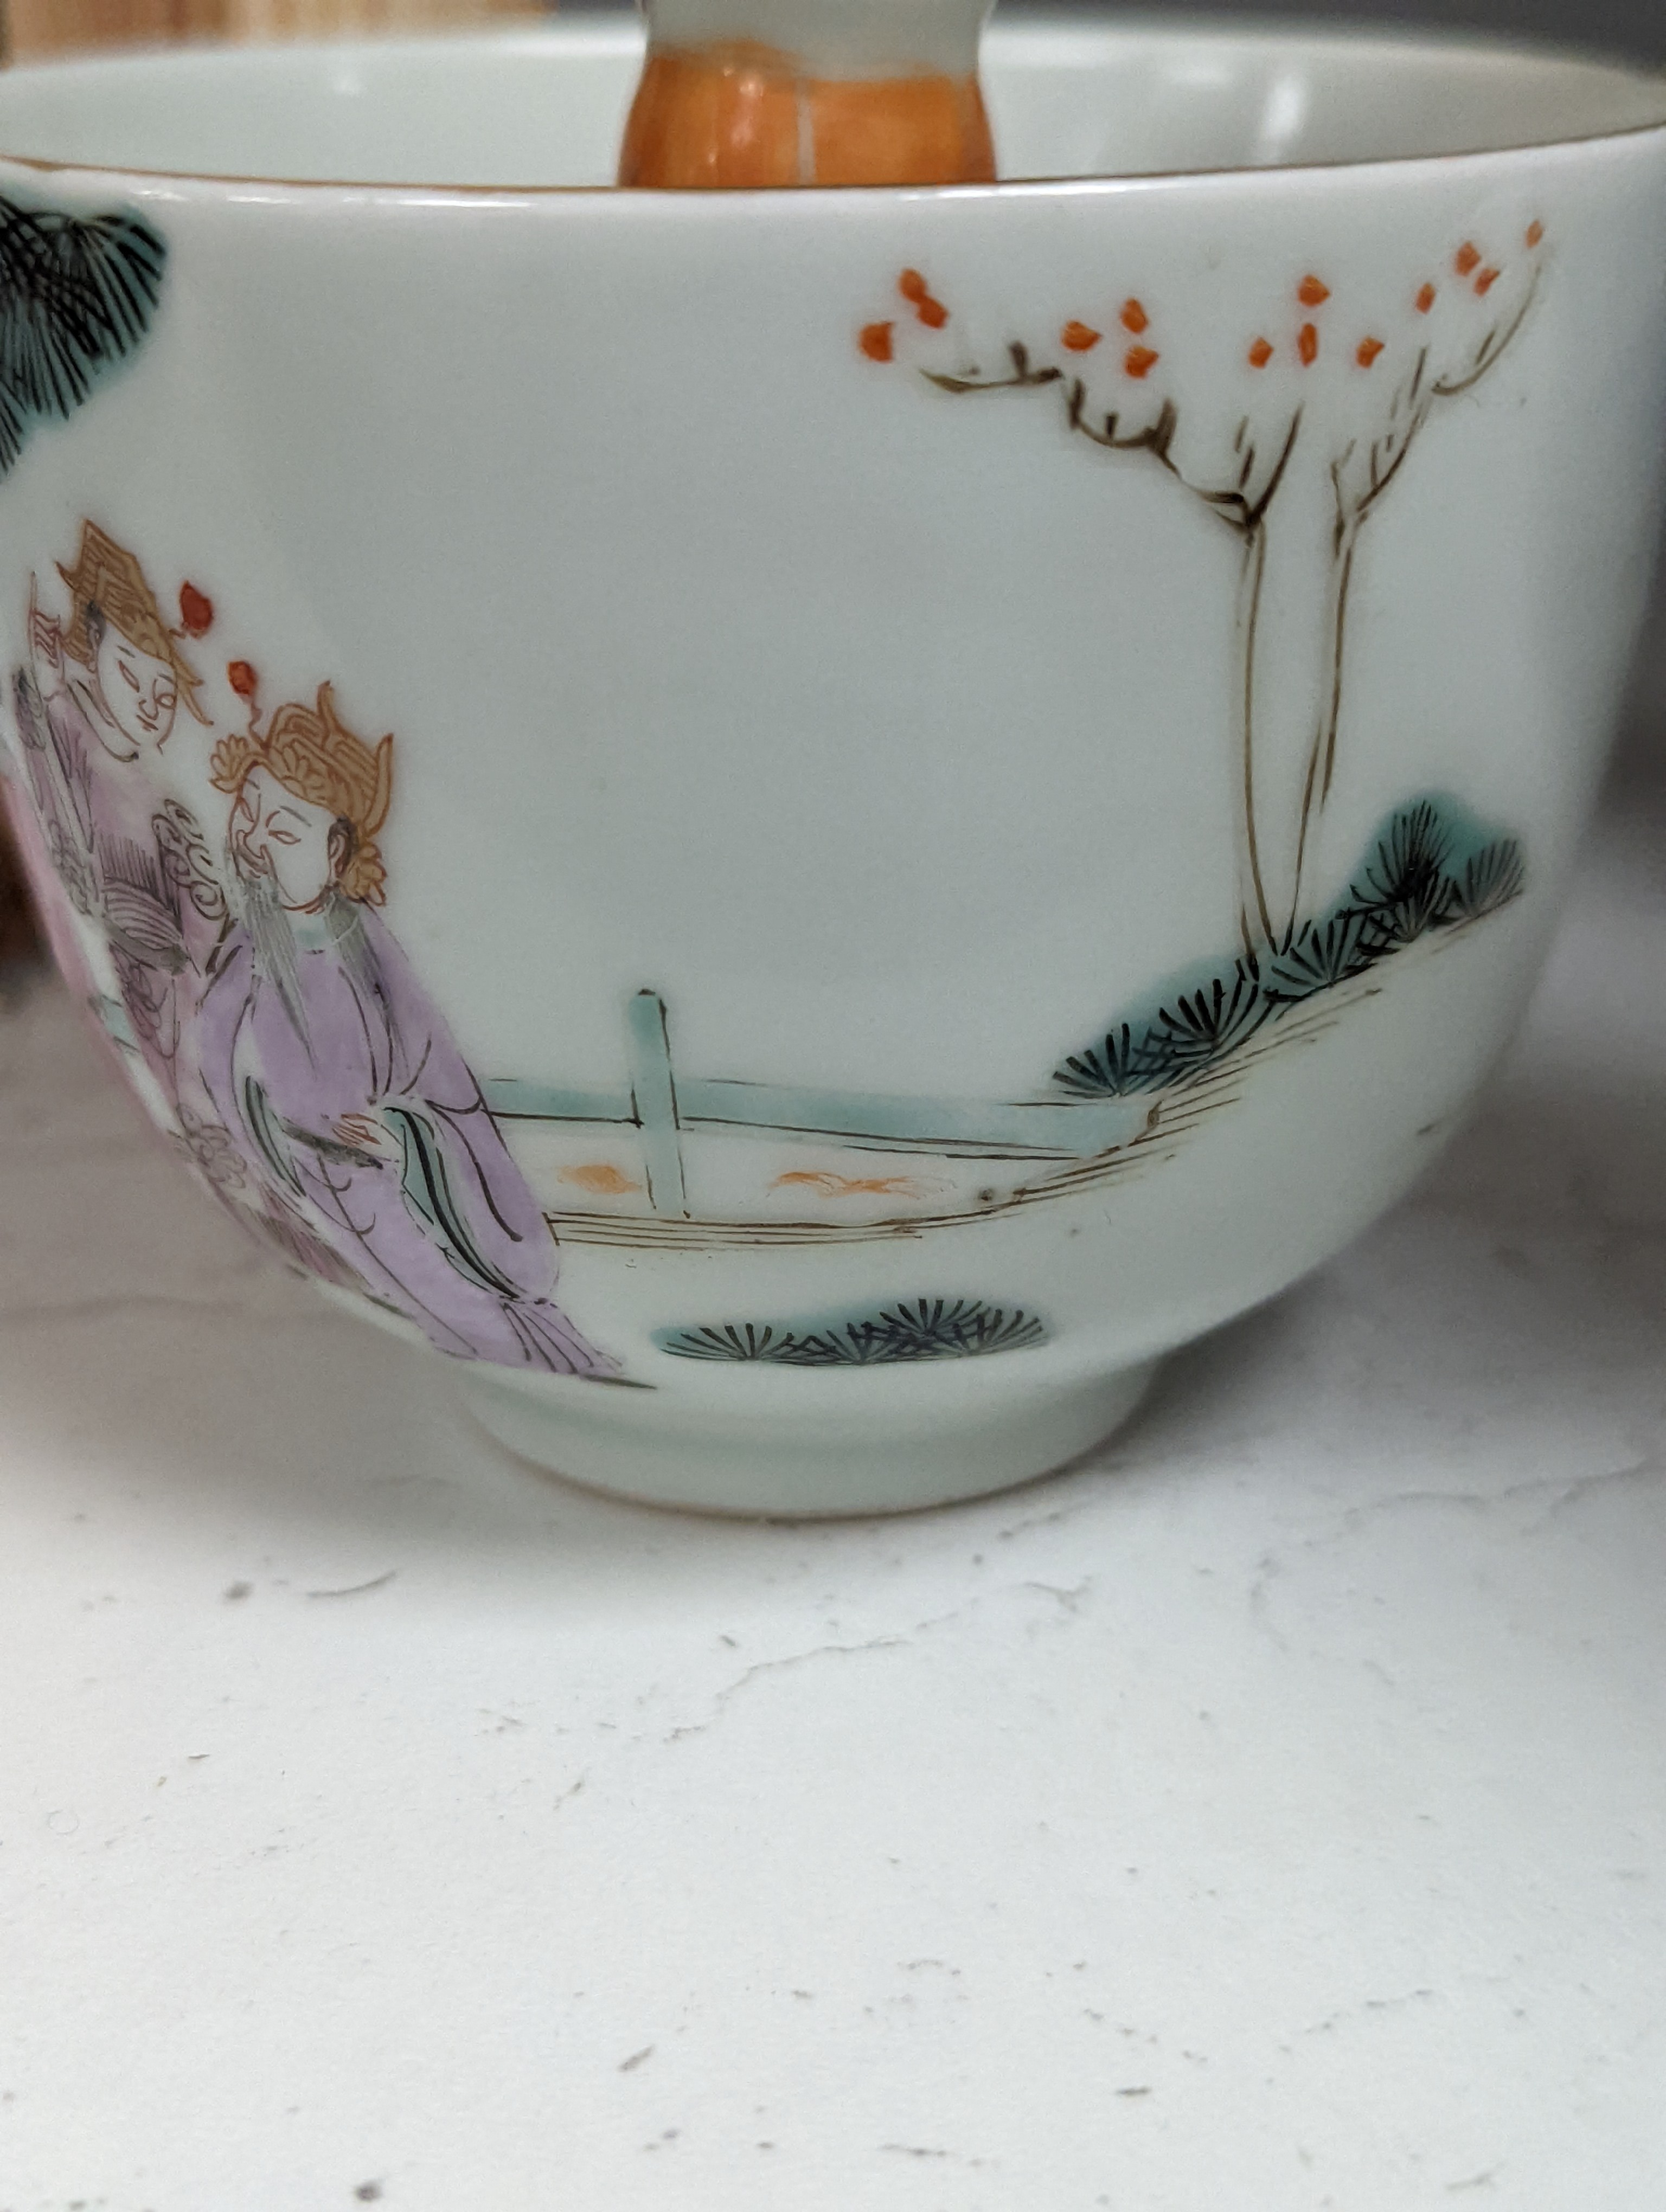 A Chinese famille rose puzzle cup, 8cm high